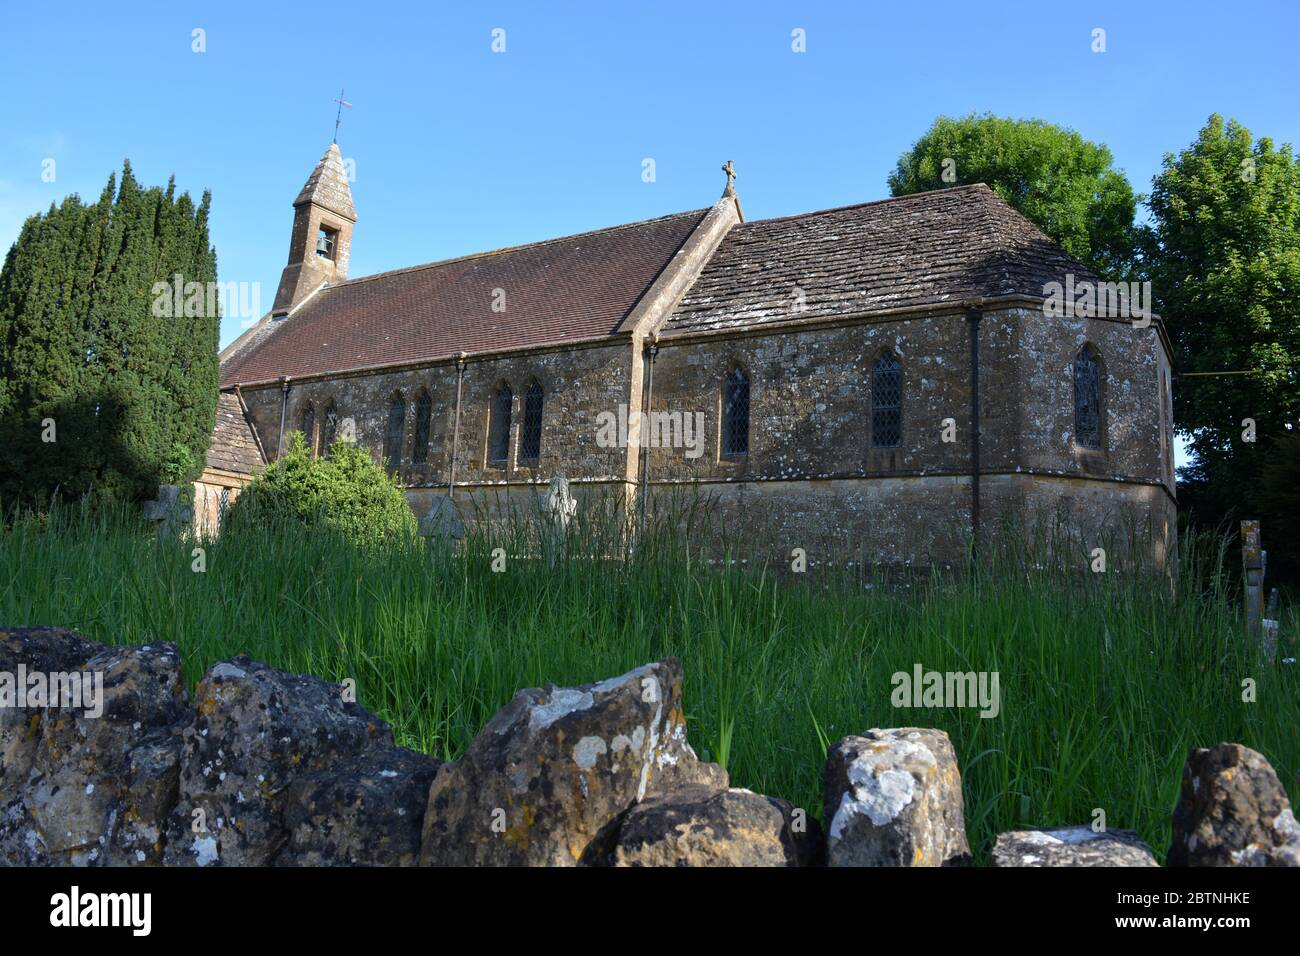 View over the boundary wall to Church of St Cuthbert, closed during the coronavirus pandemic, overgrown grass in the church graveyard. Oborne, Dorset Stock Photo